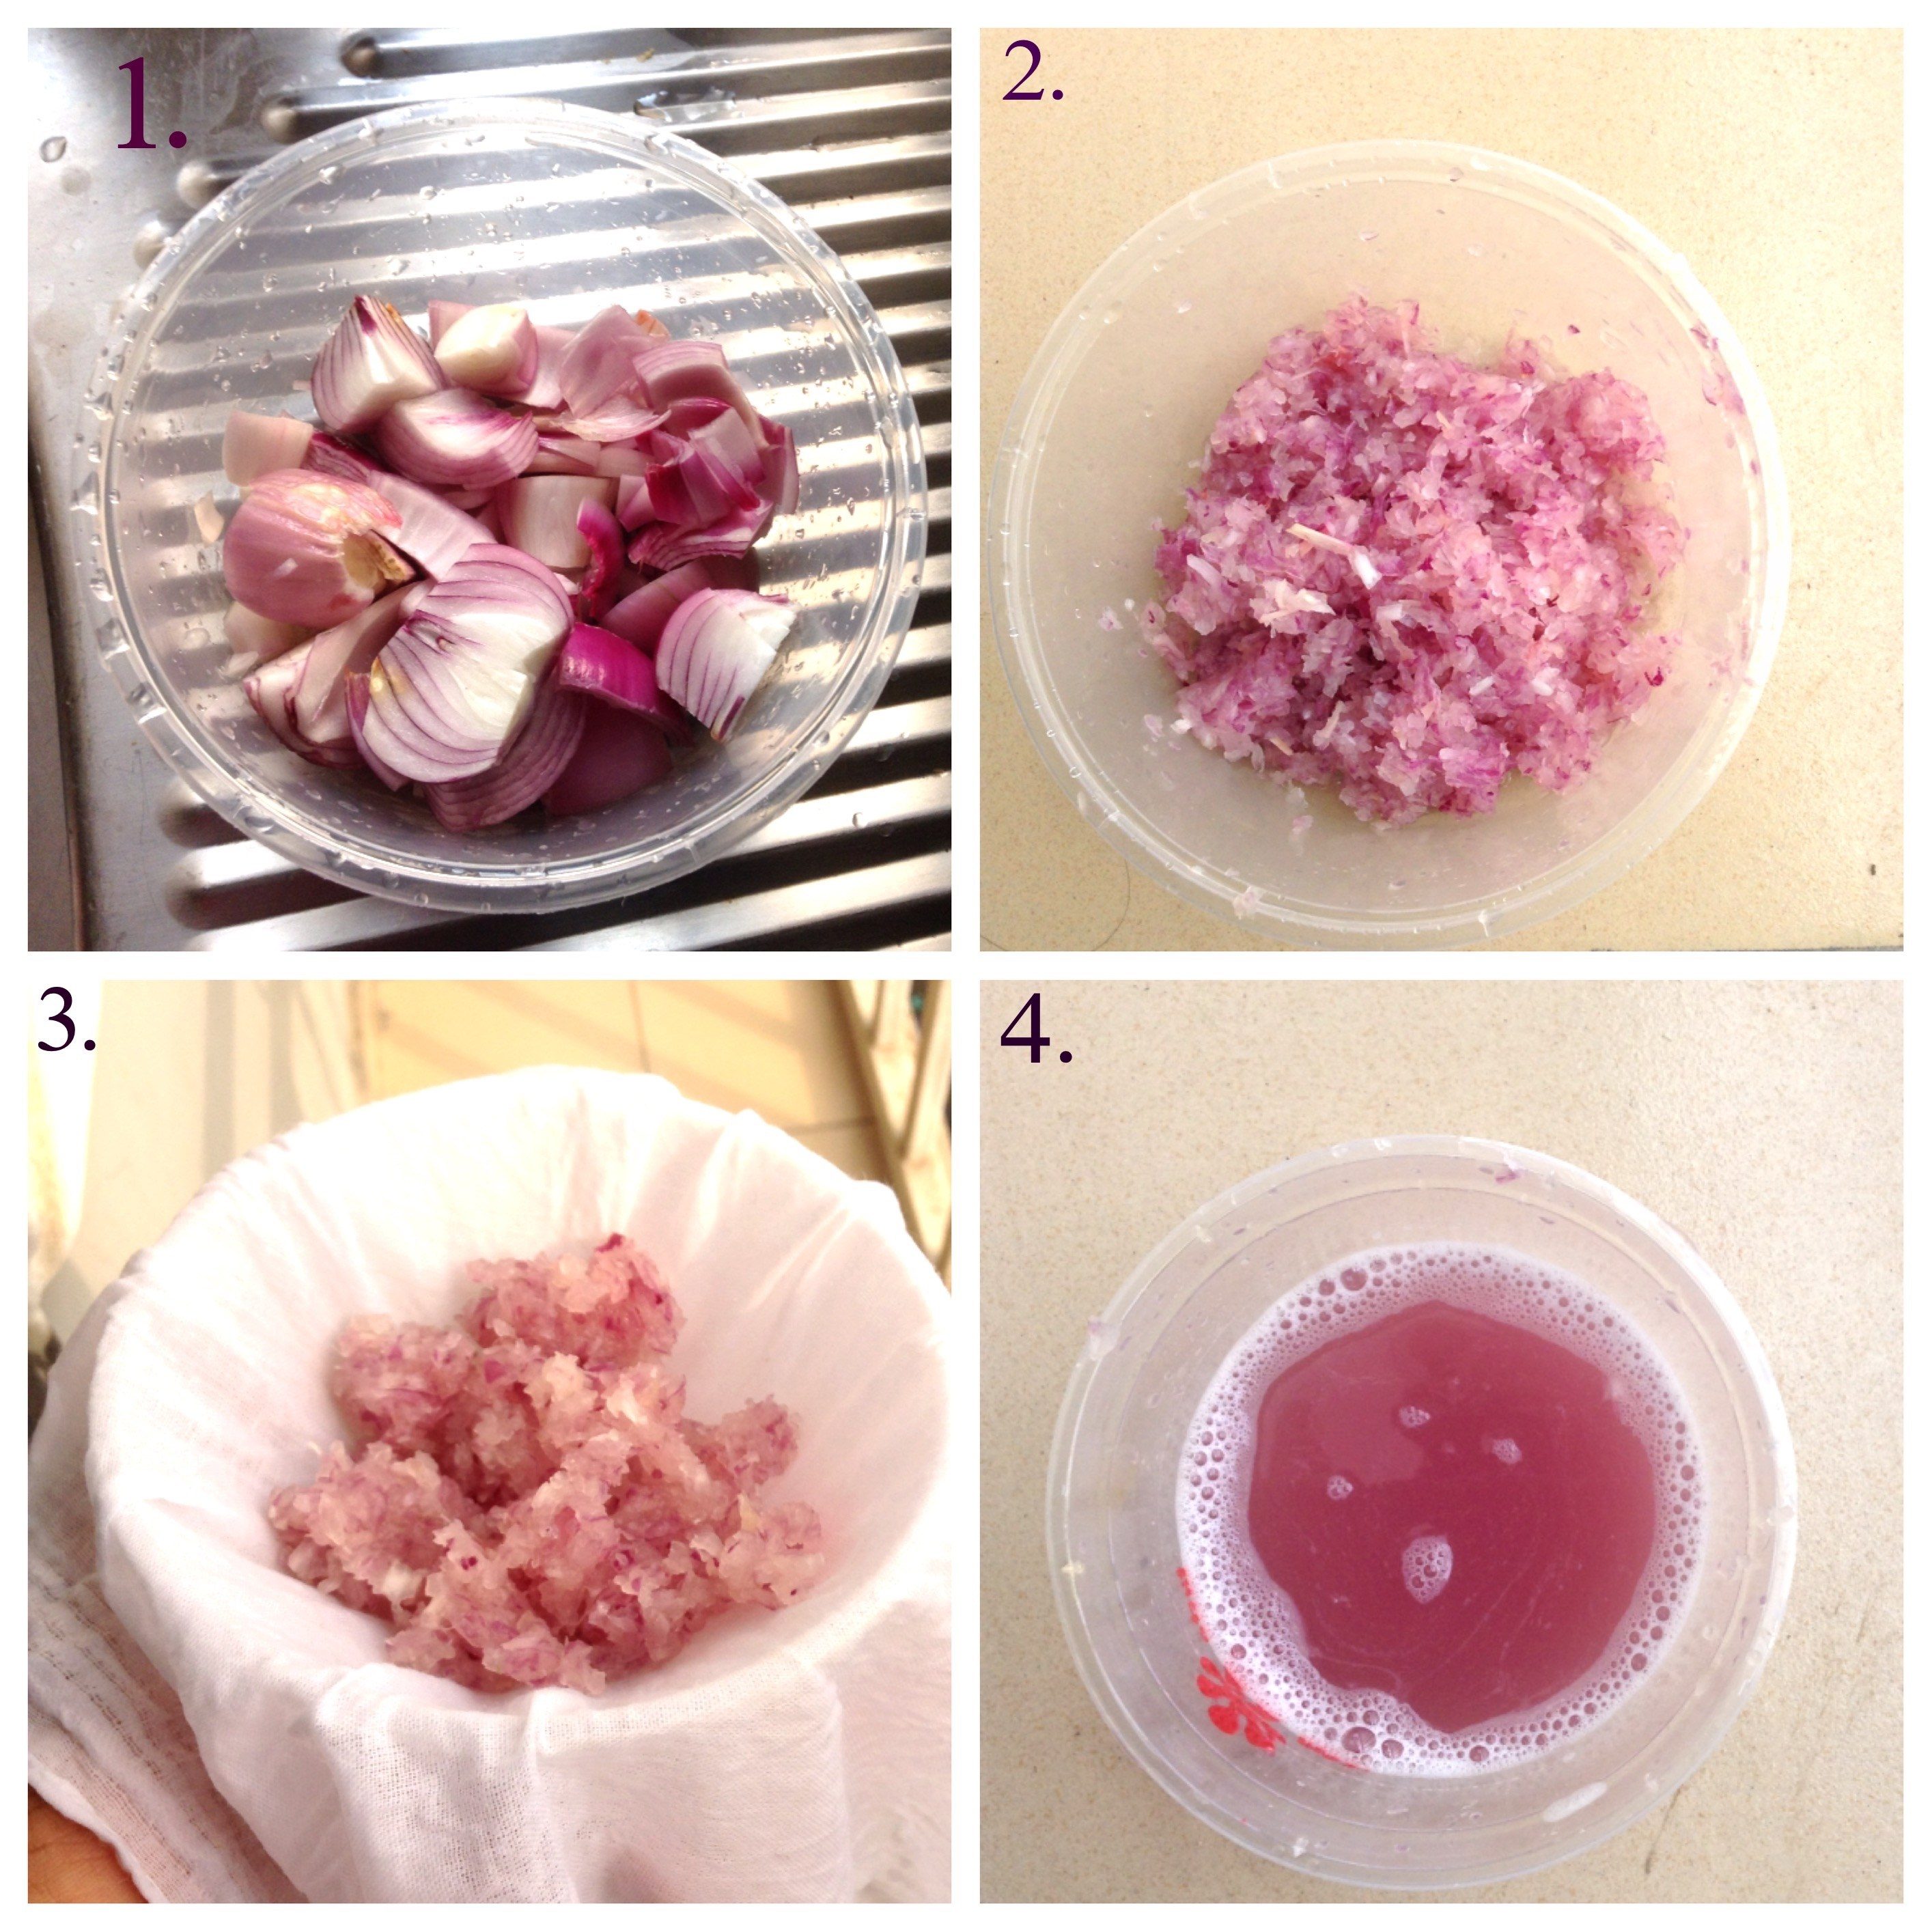 How to prepare Onion Extract